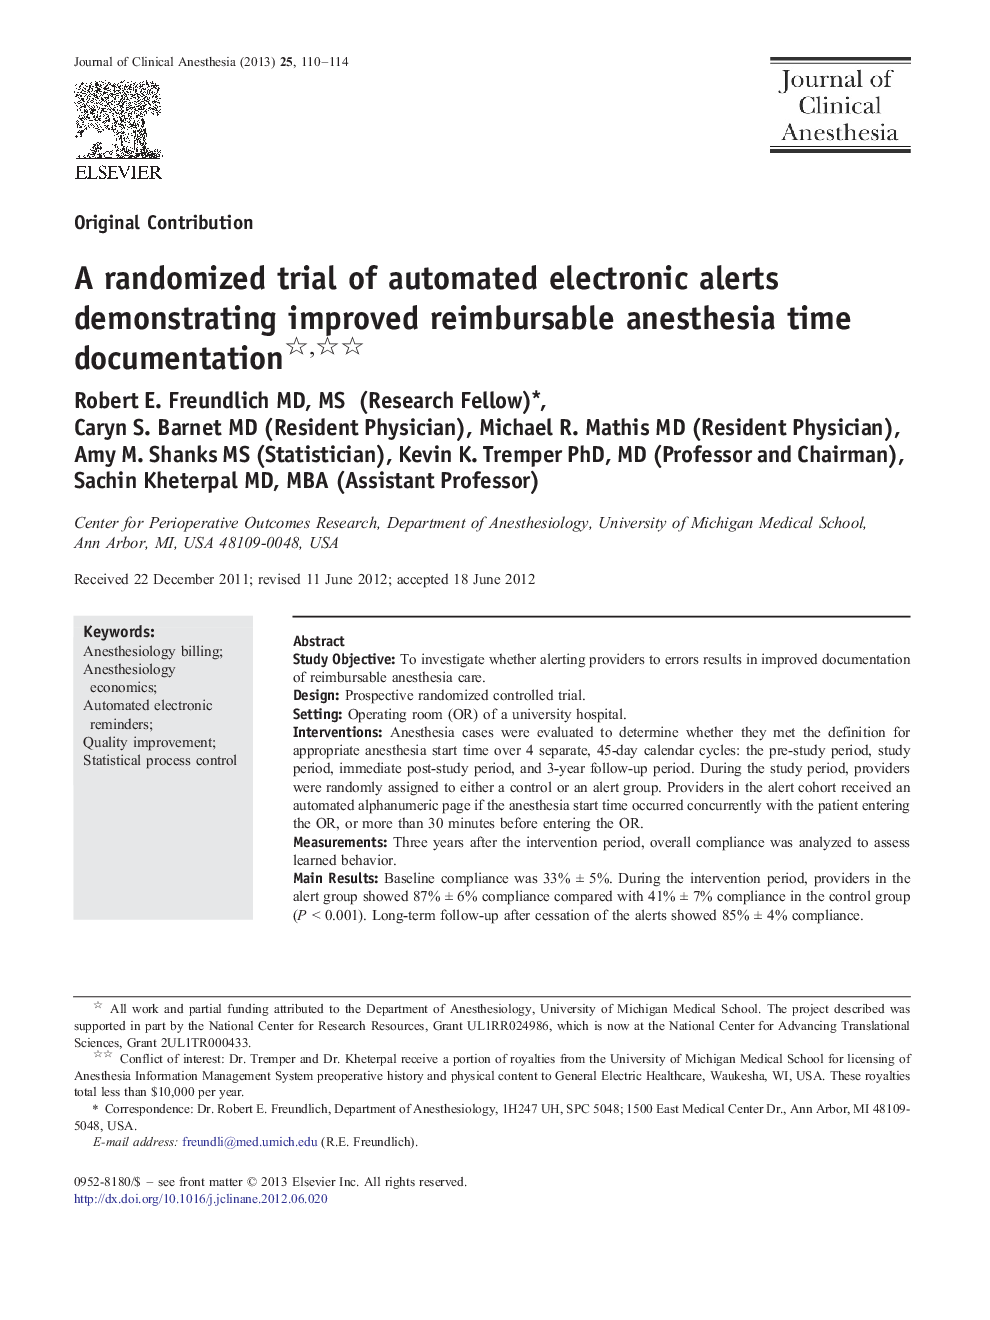 A randomized trial of automated electronic alerts demonstrating improved reimbursable anesthesia time documentation 